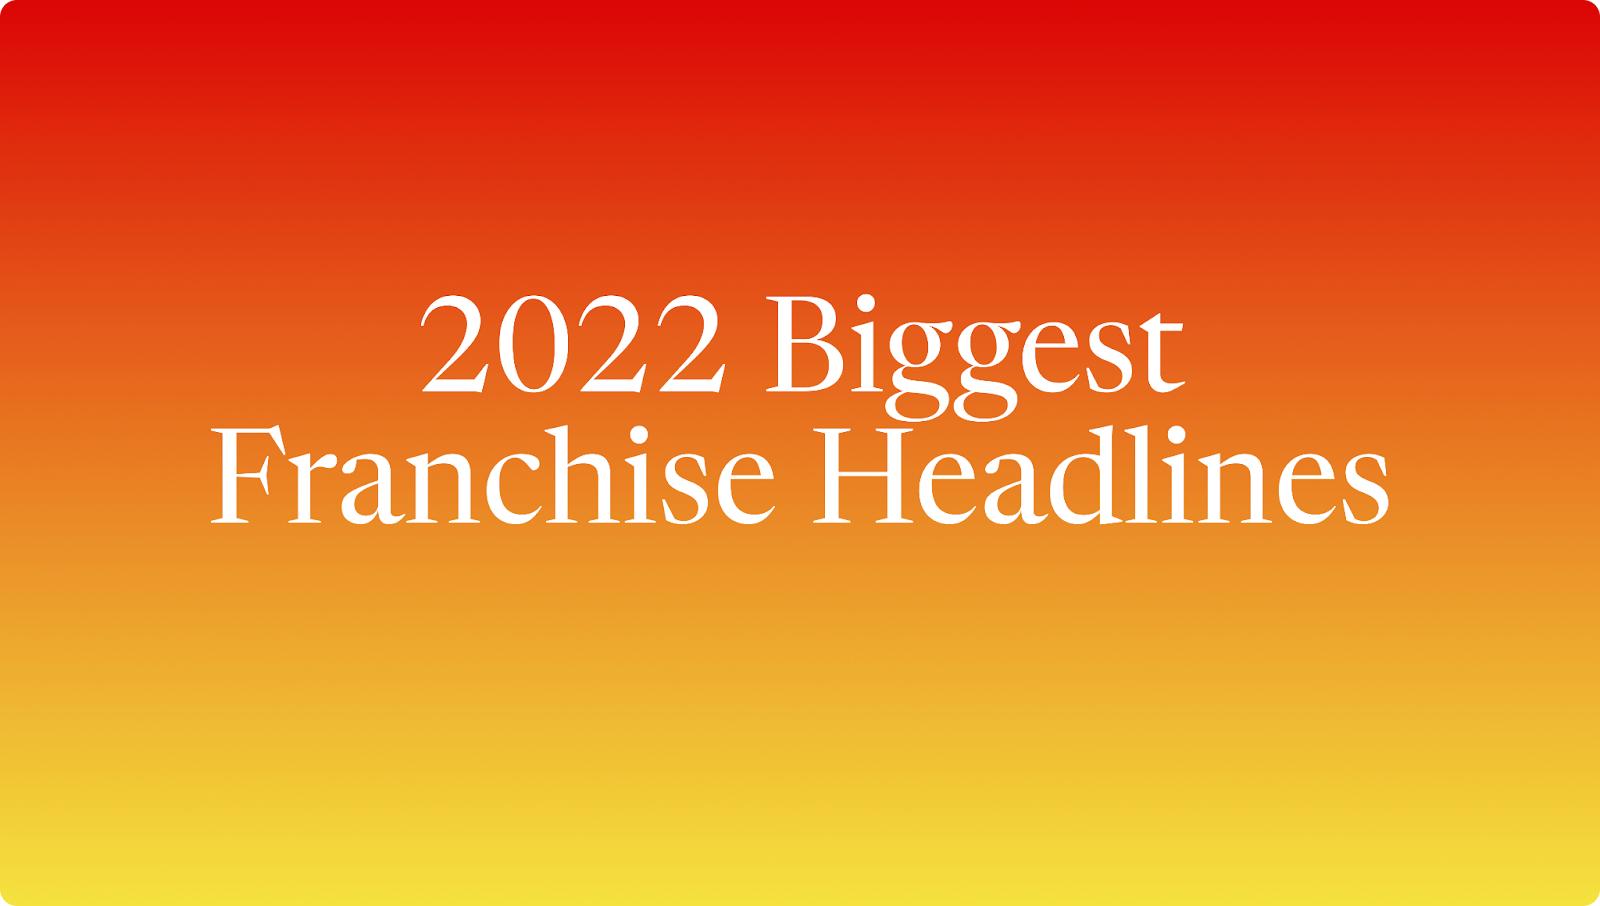 🍟 12/29/2022 - The Top 10 Franchise Headlines of 2022 - The Wolf